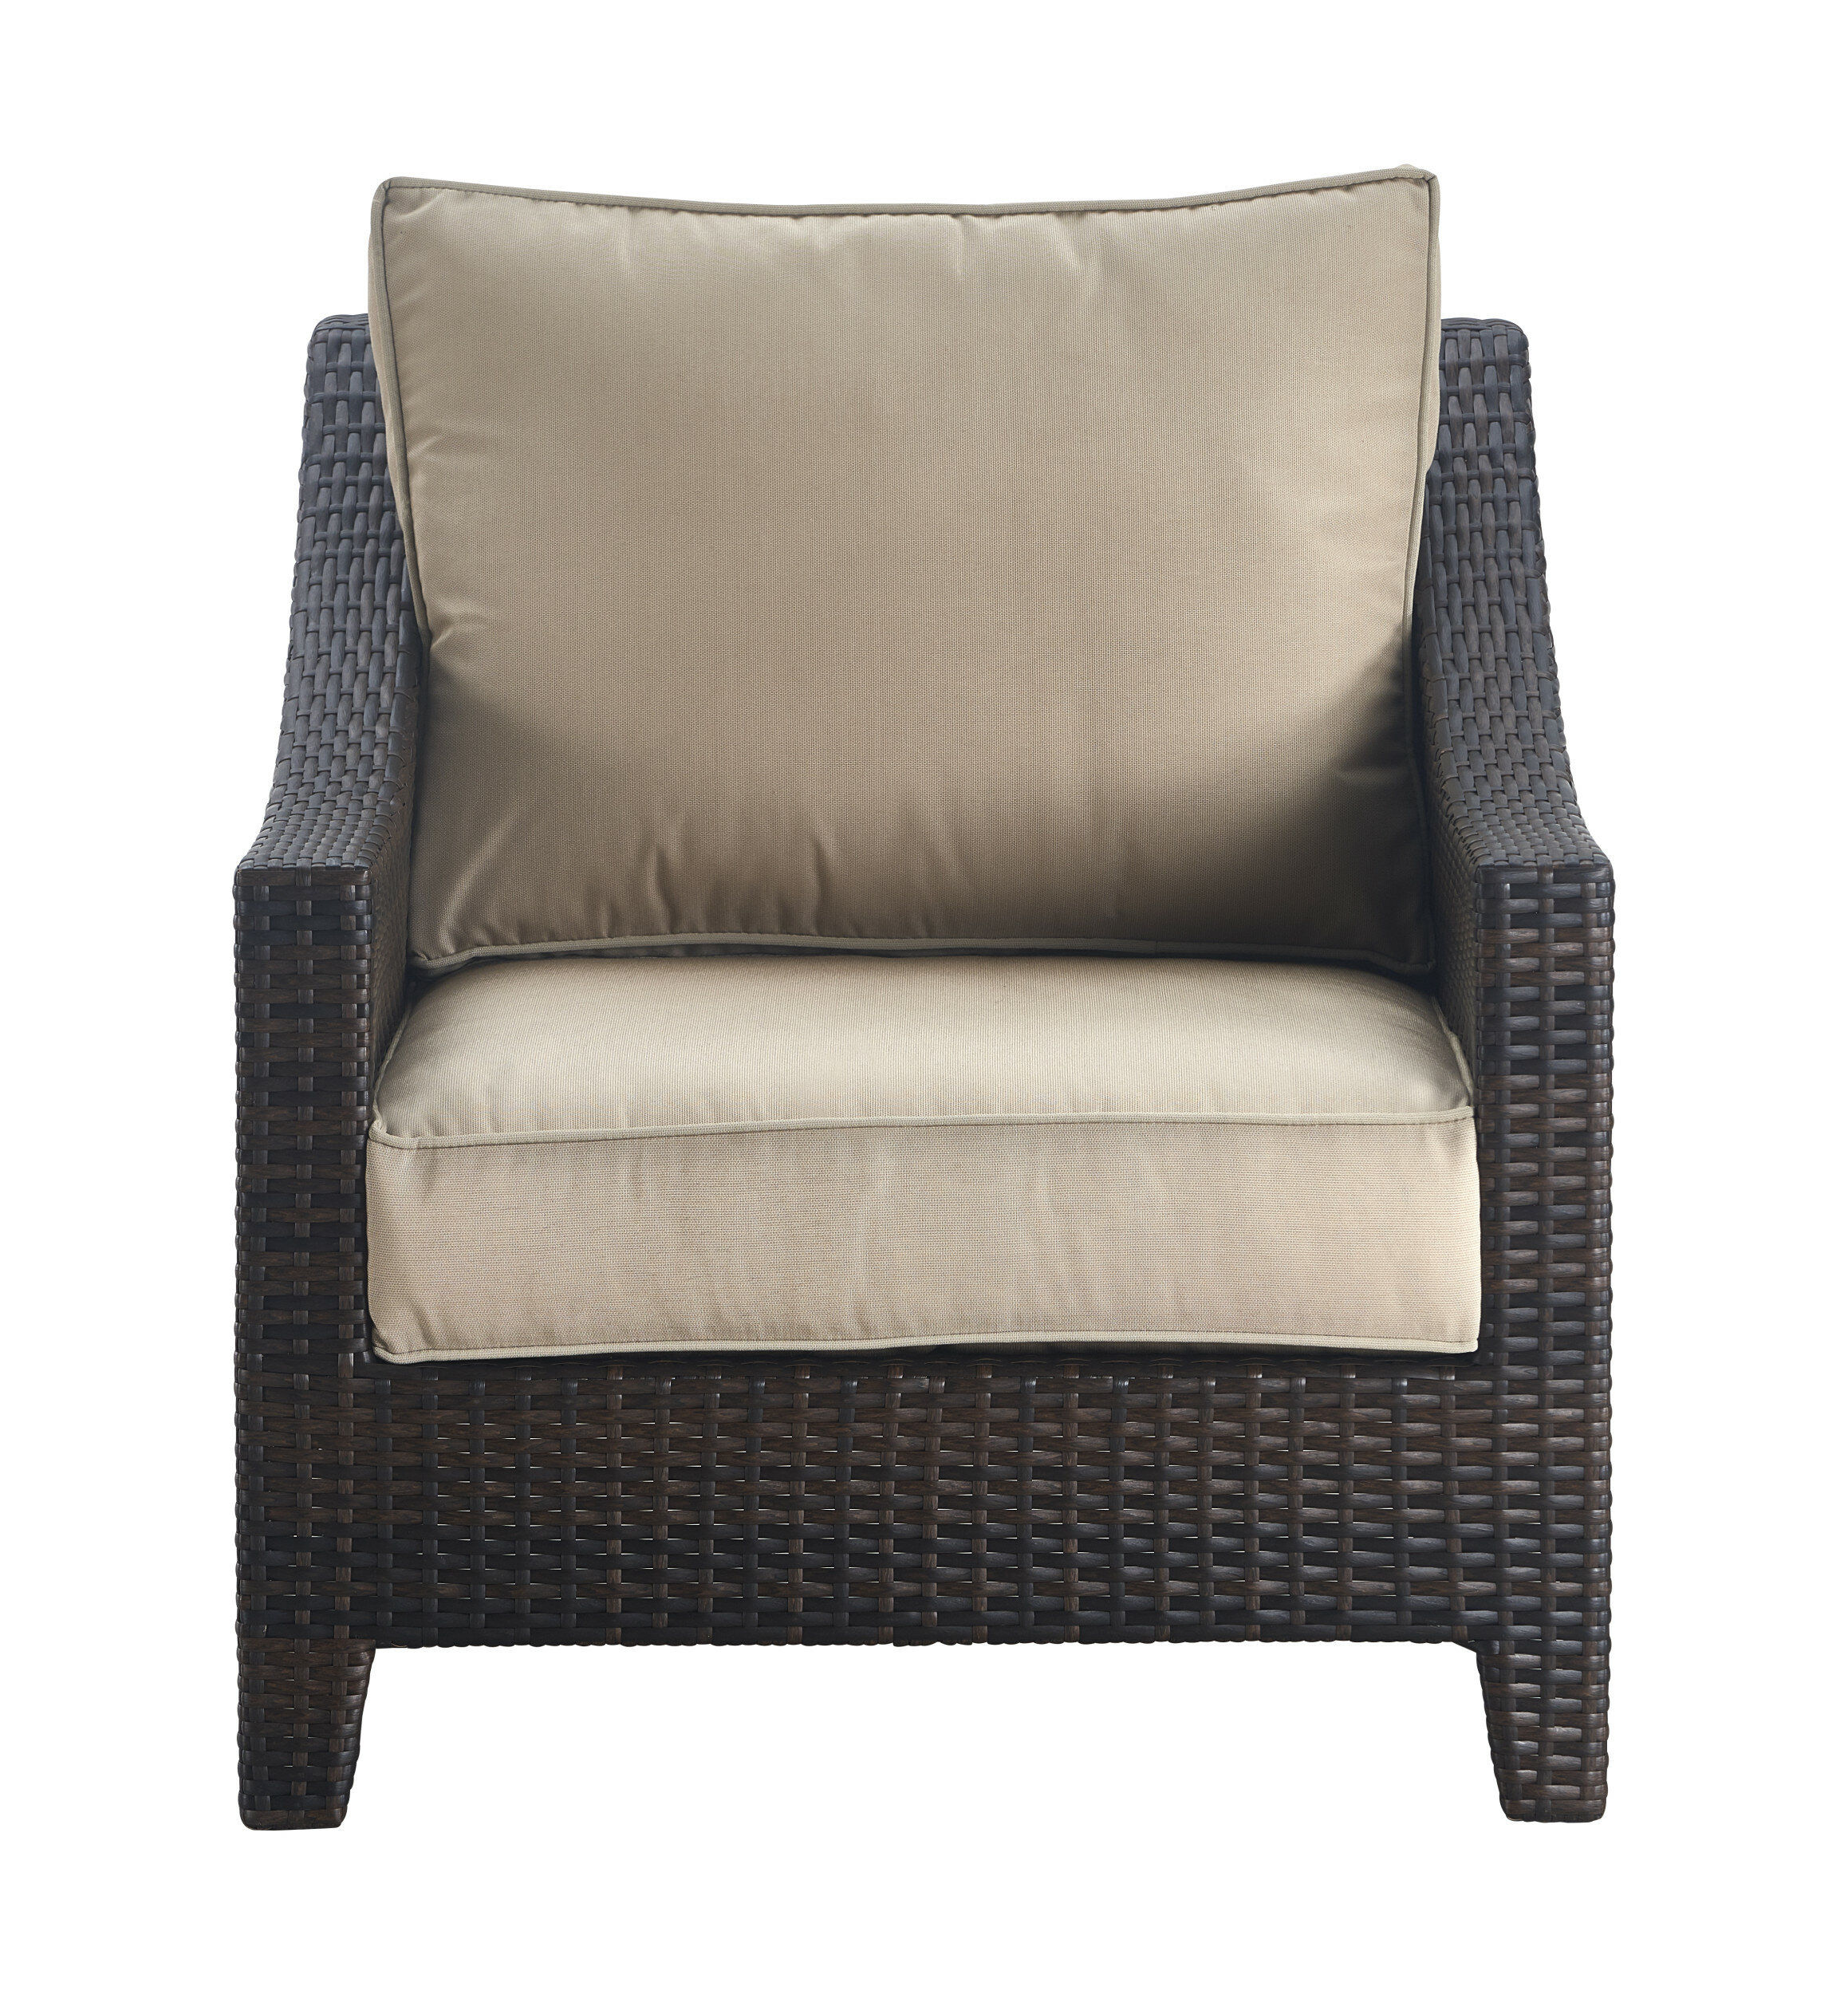 Serta At Home Tahoe Outdoor Wicker Patio Chair With Cushions